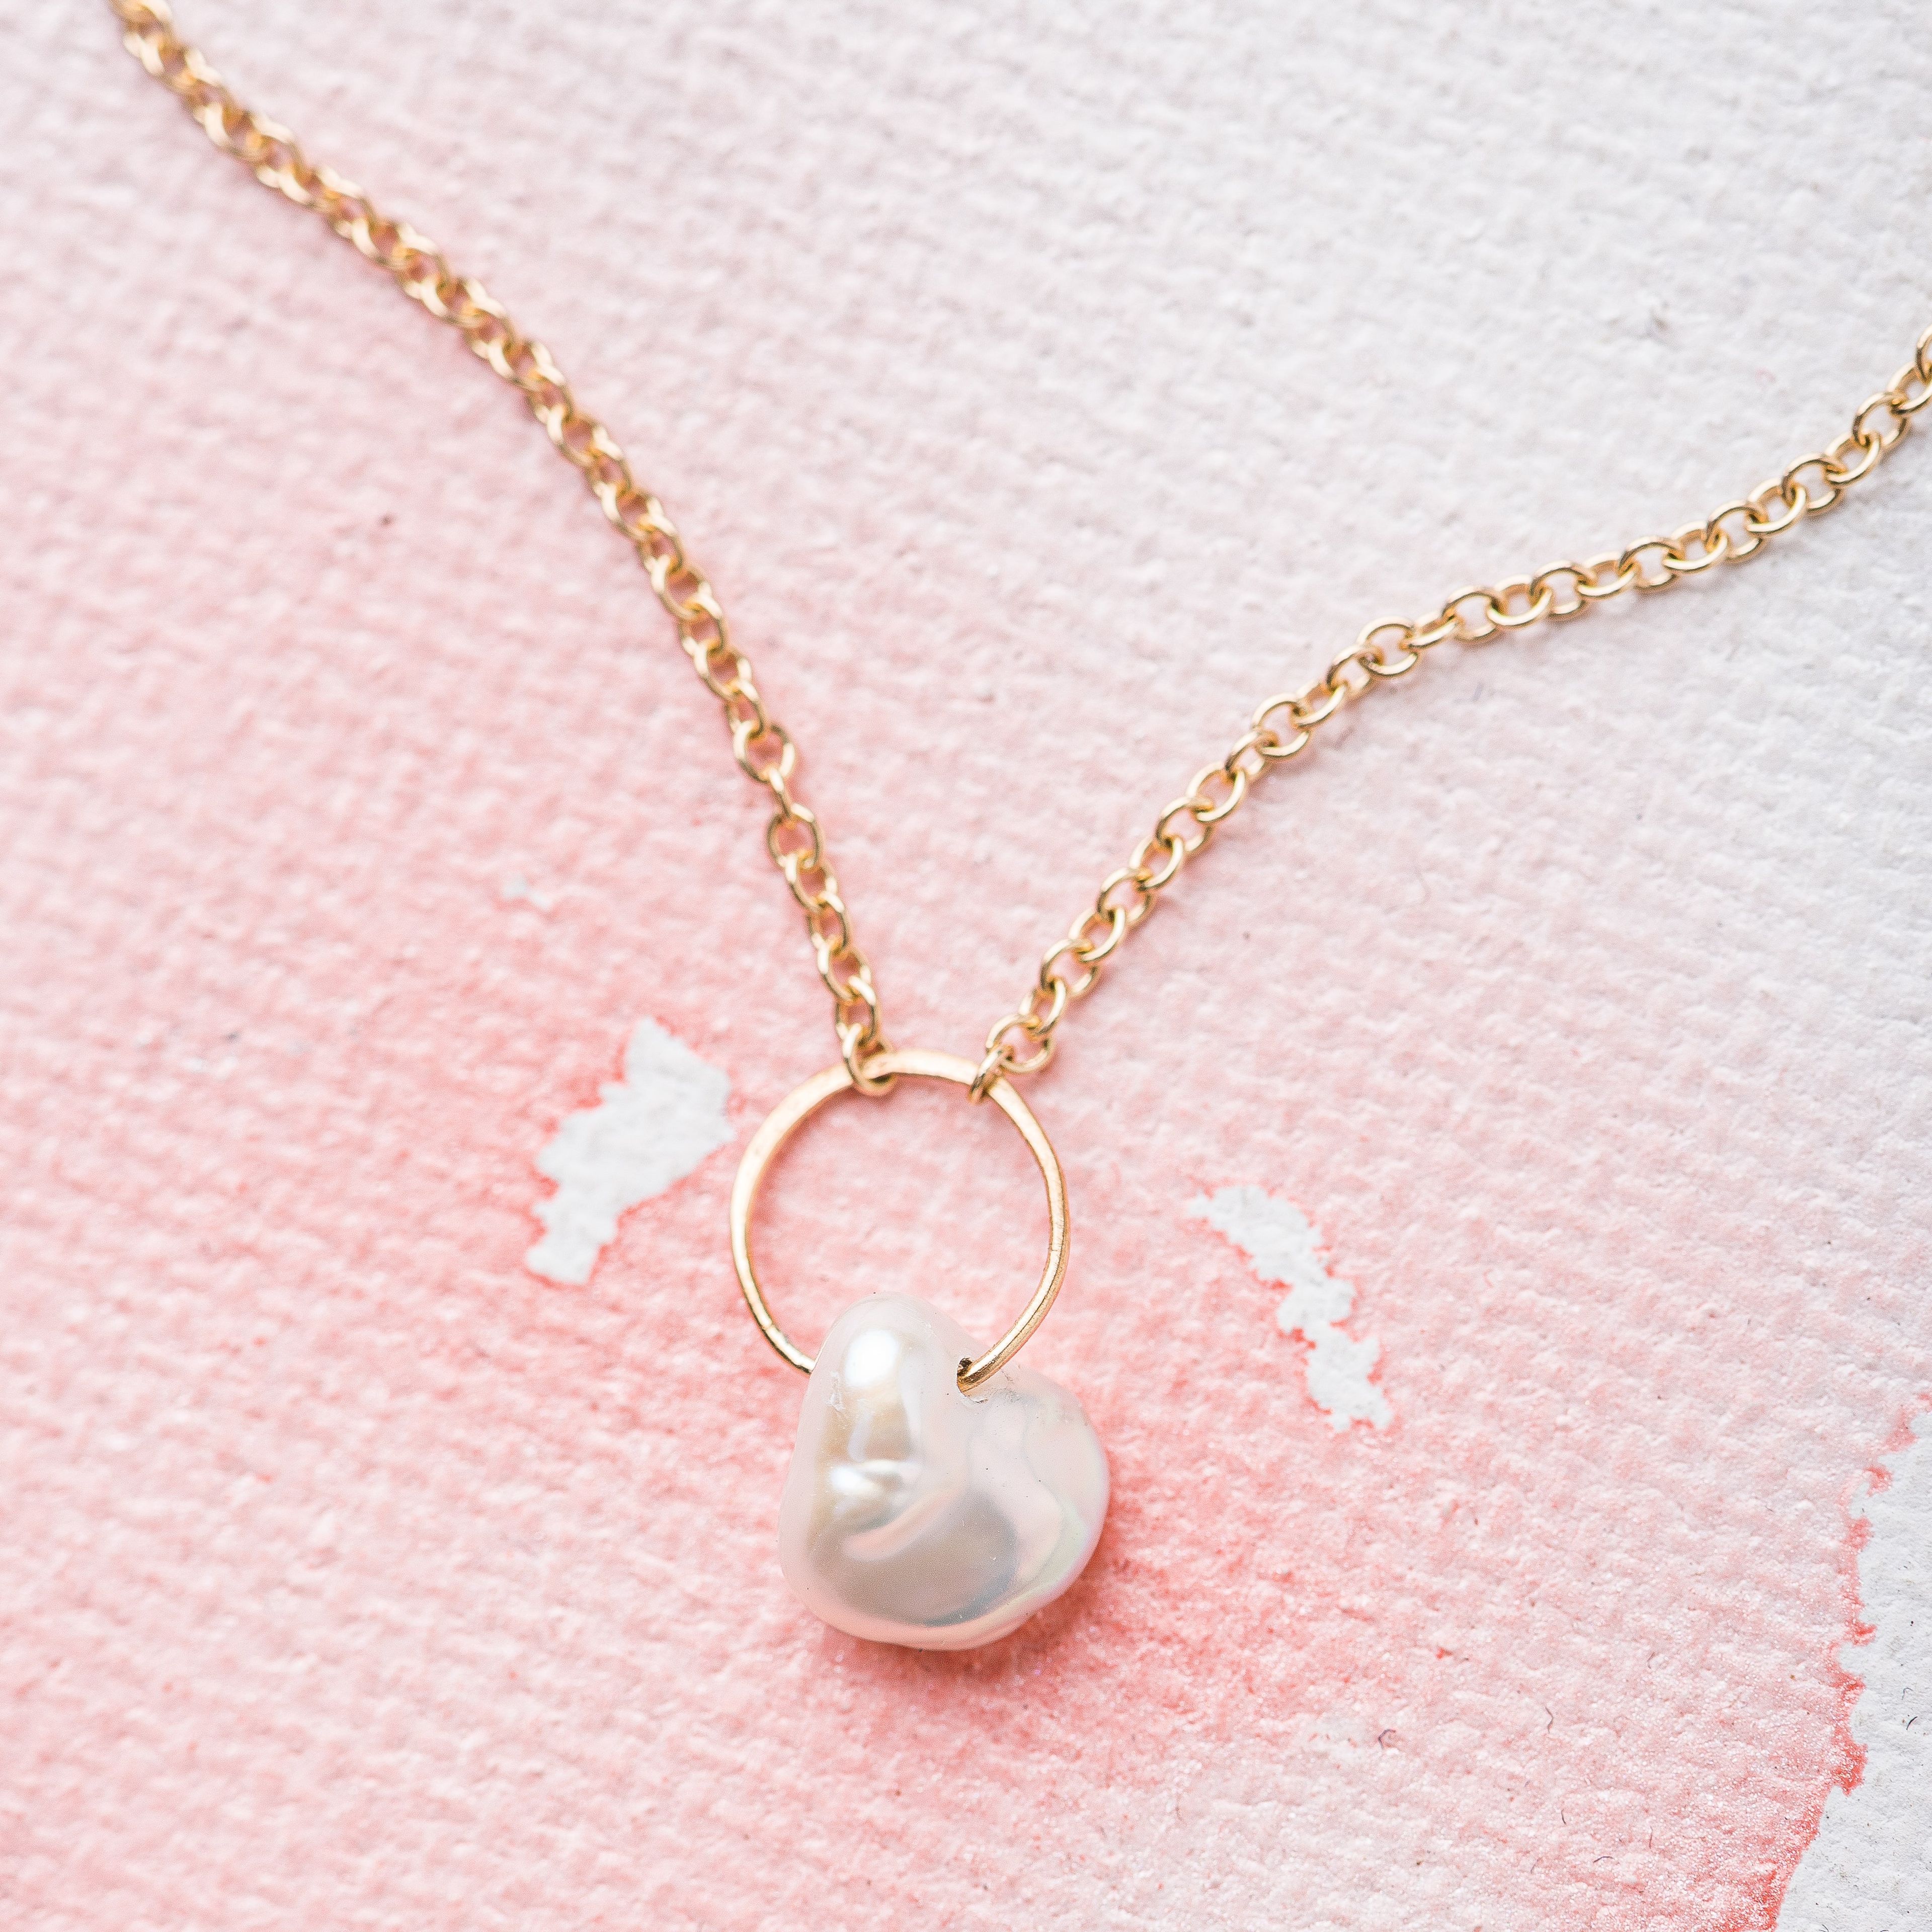 Keshi Pearl Necklace in 14k Gold